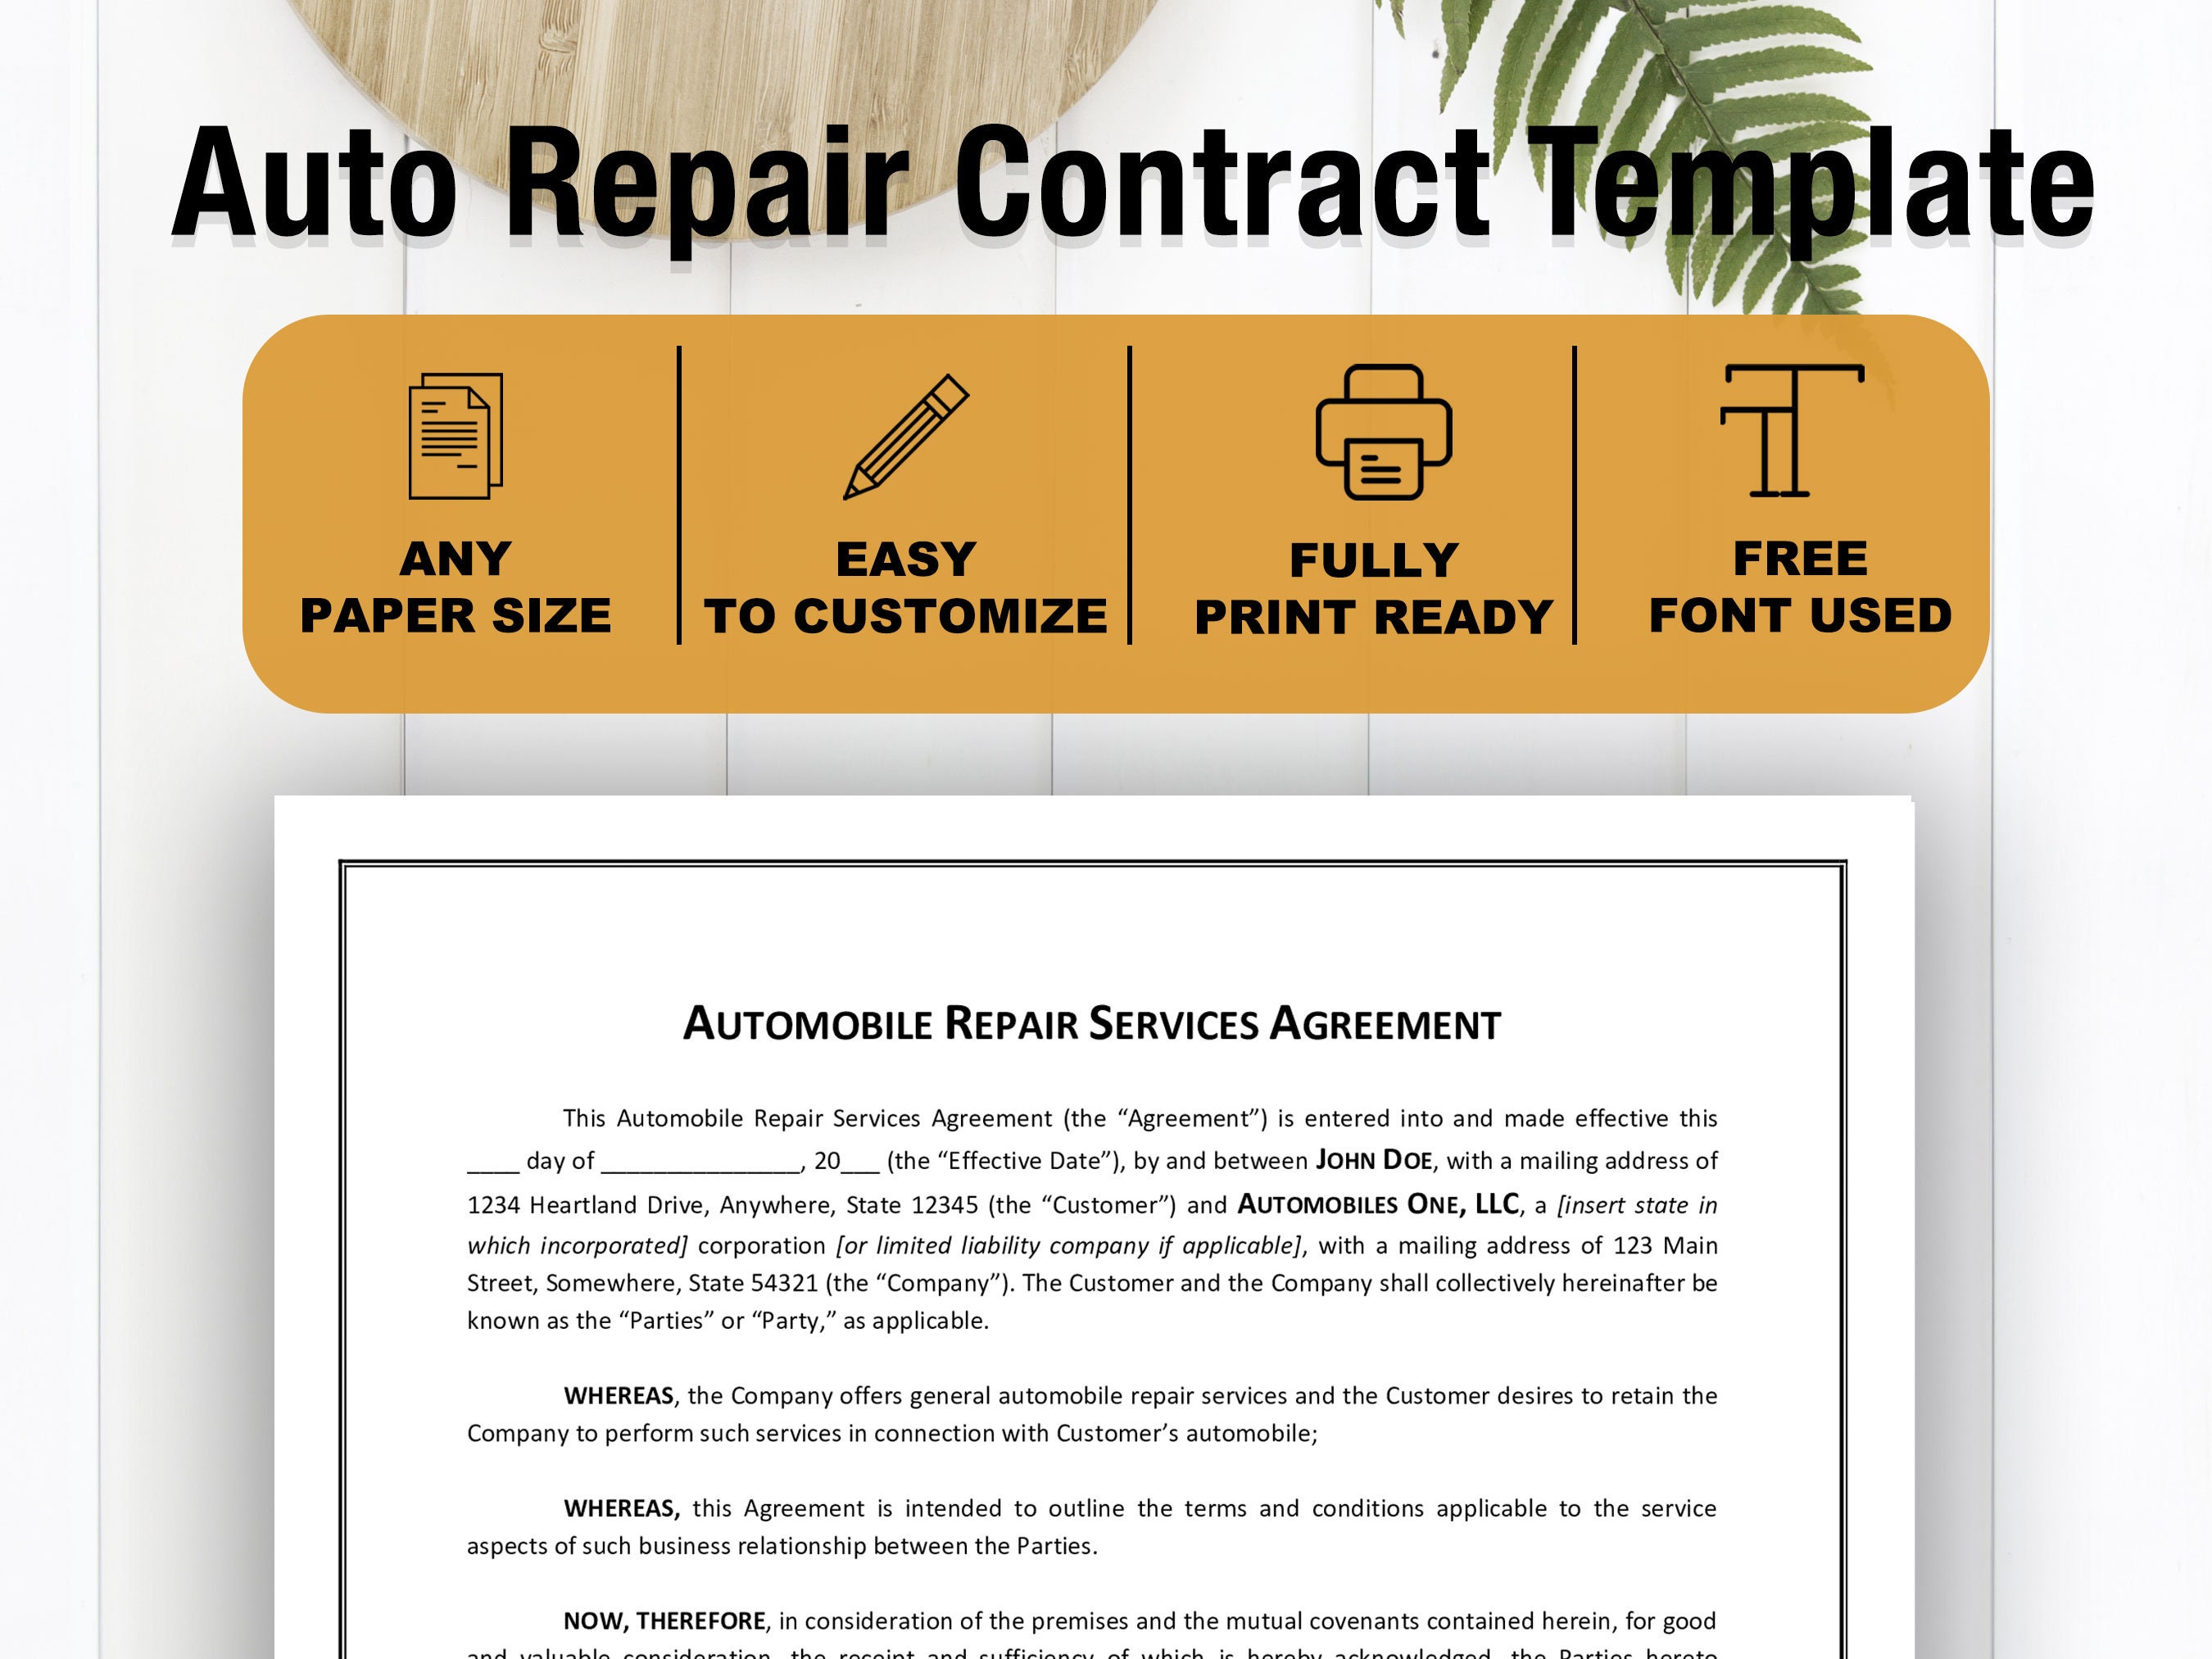 Auto Repair Contract Template Free